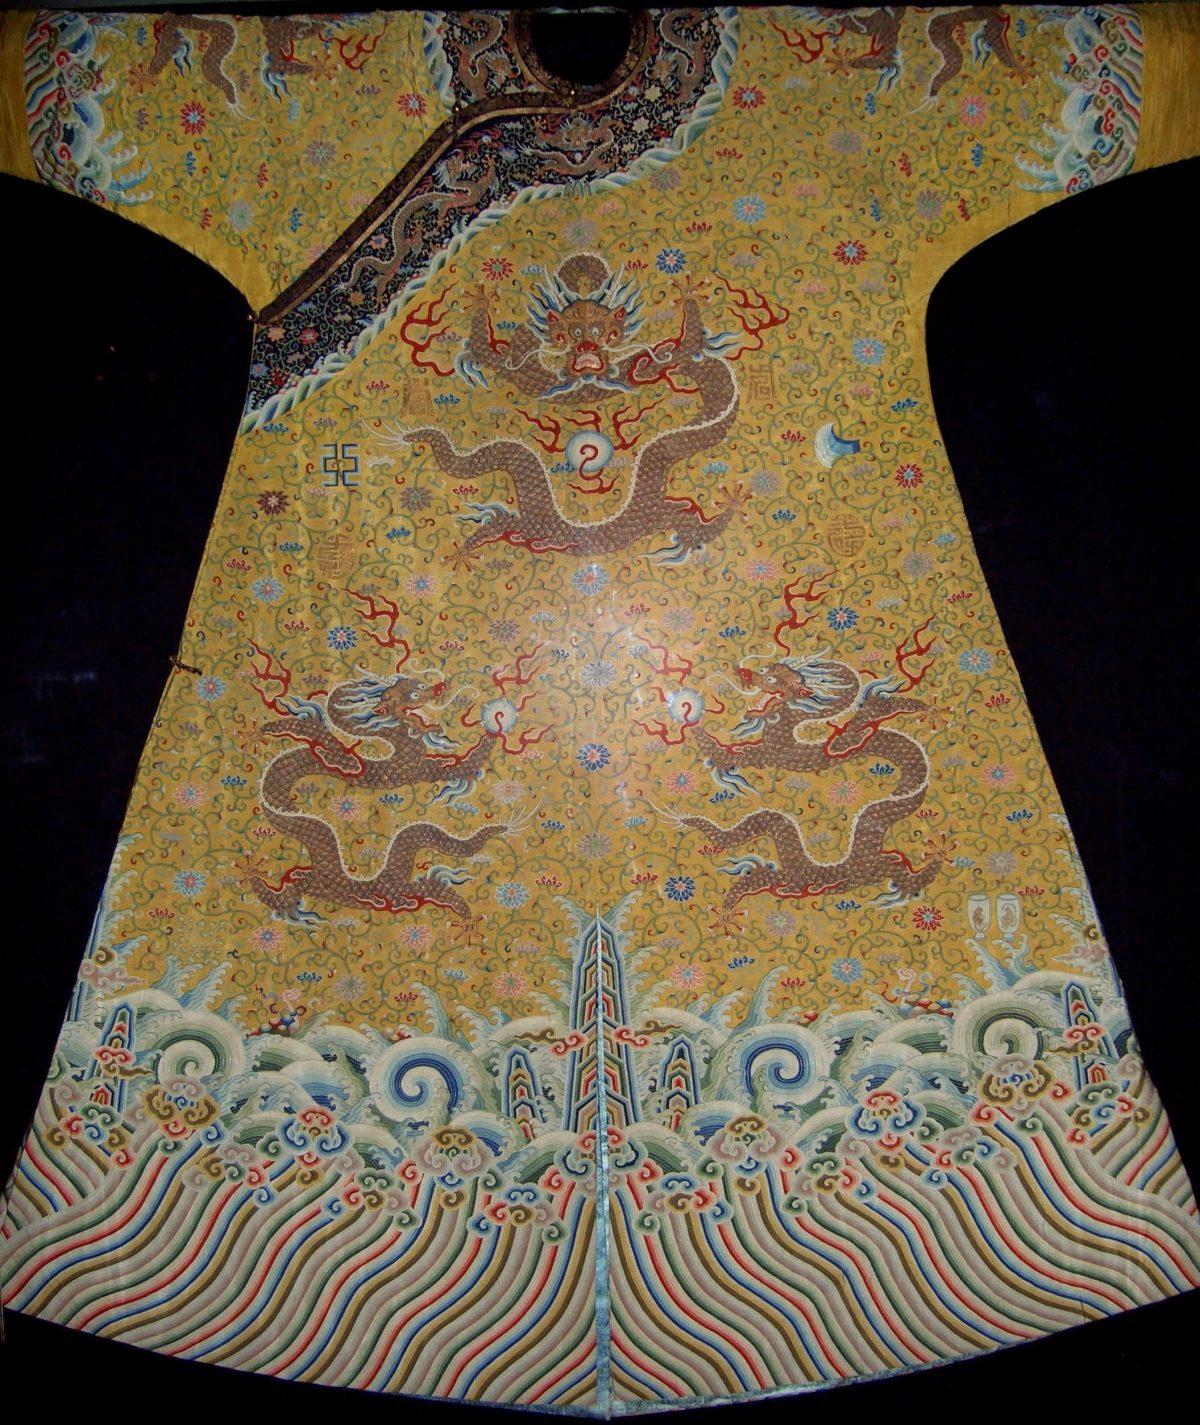 Dragon robe of the Chinese Emperor Qianlong (1736–1796). Grassi Museum, Leipzig, Germany. (<a href="http://creativecommons.org/licenses/by-sa/3.0/">CC BY-SA 3.0</a>)